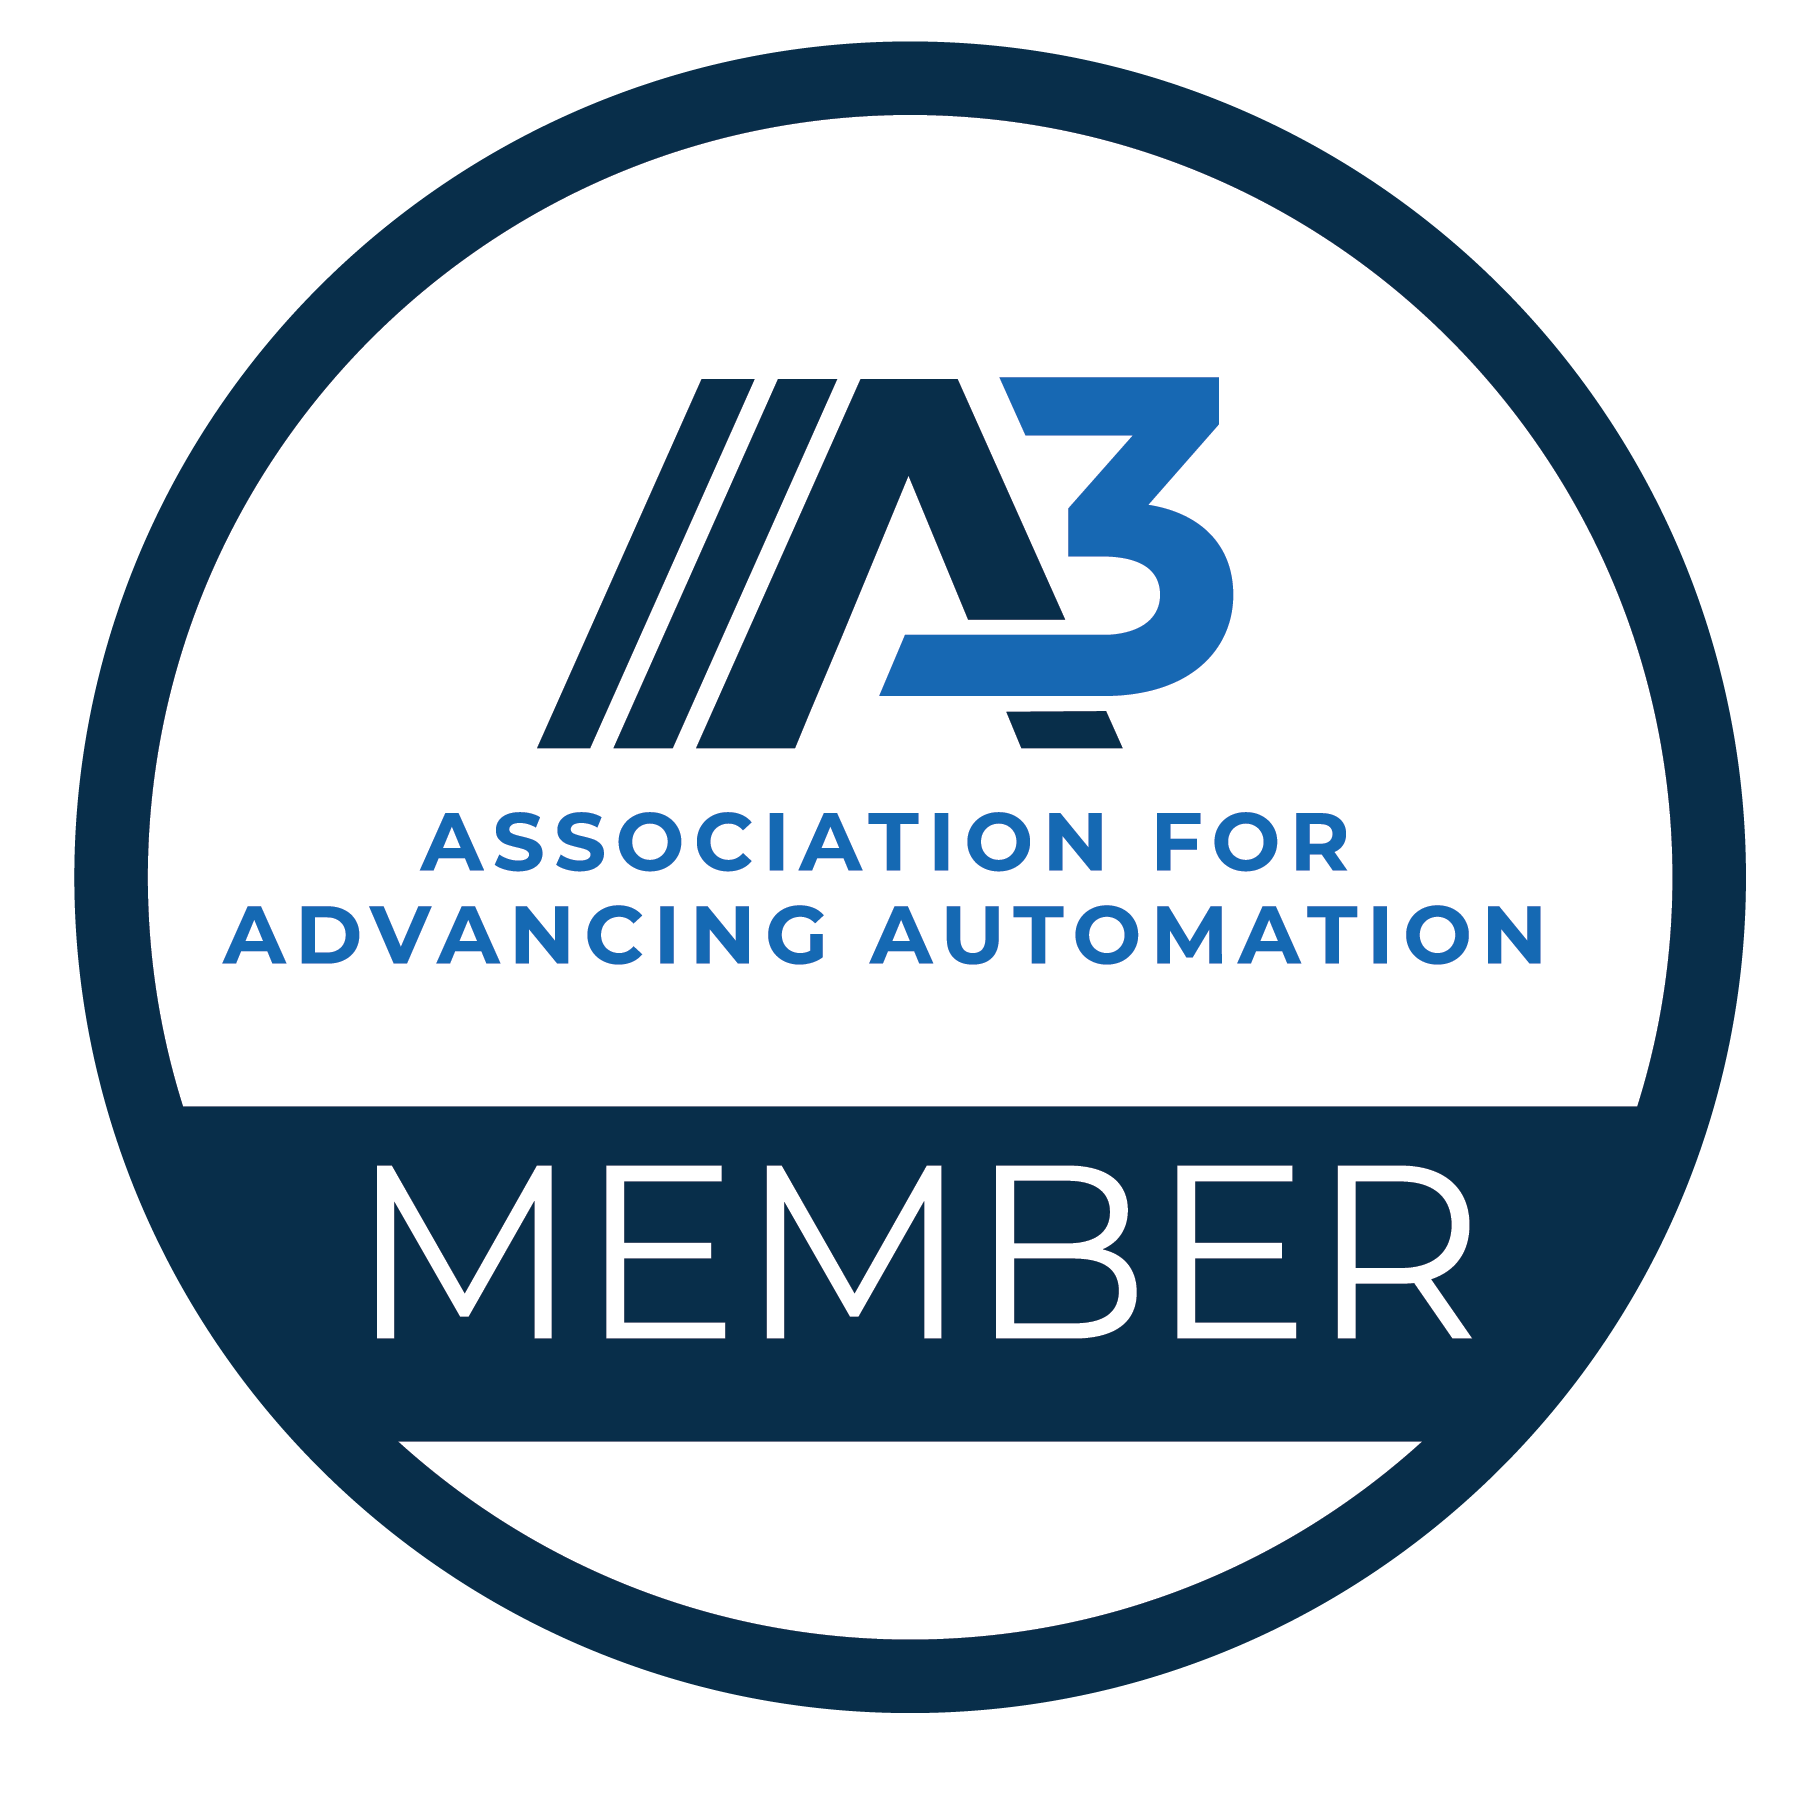 A3 Association for Advancing Automation Member